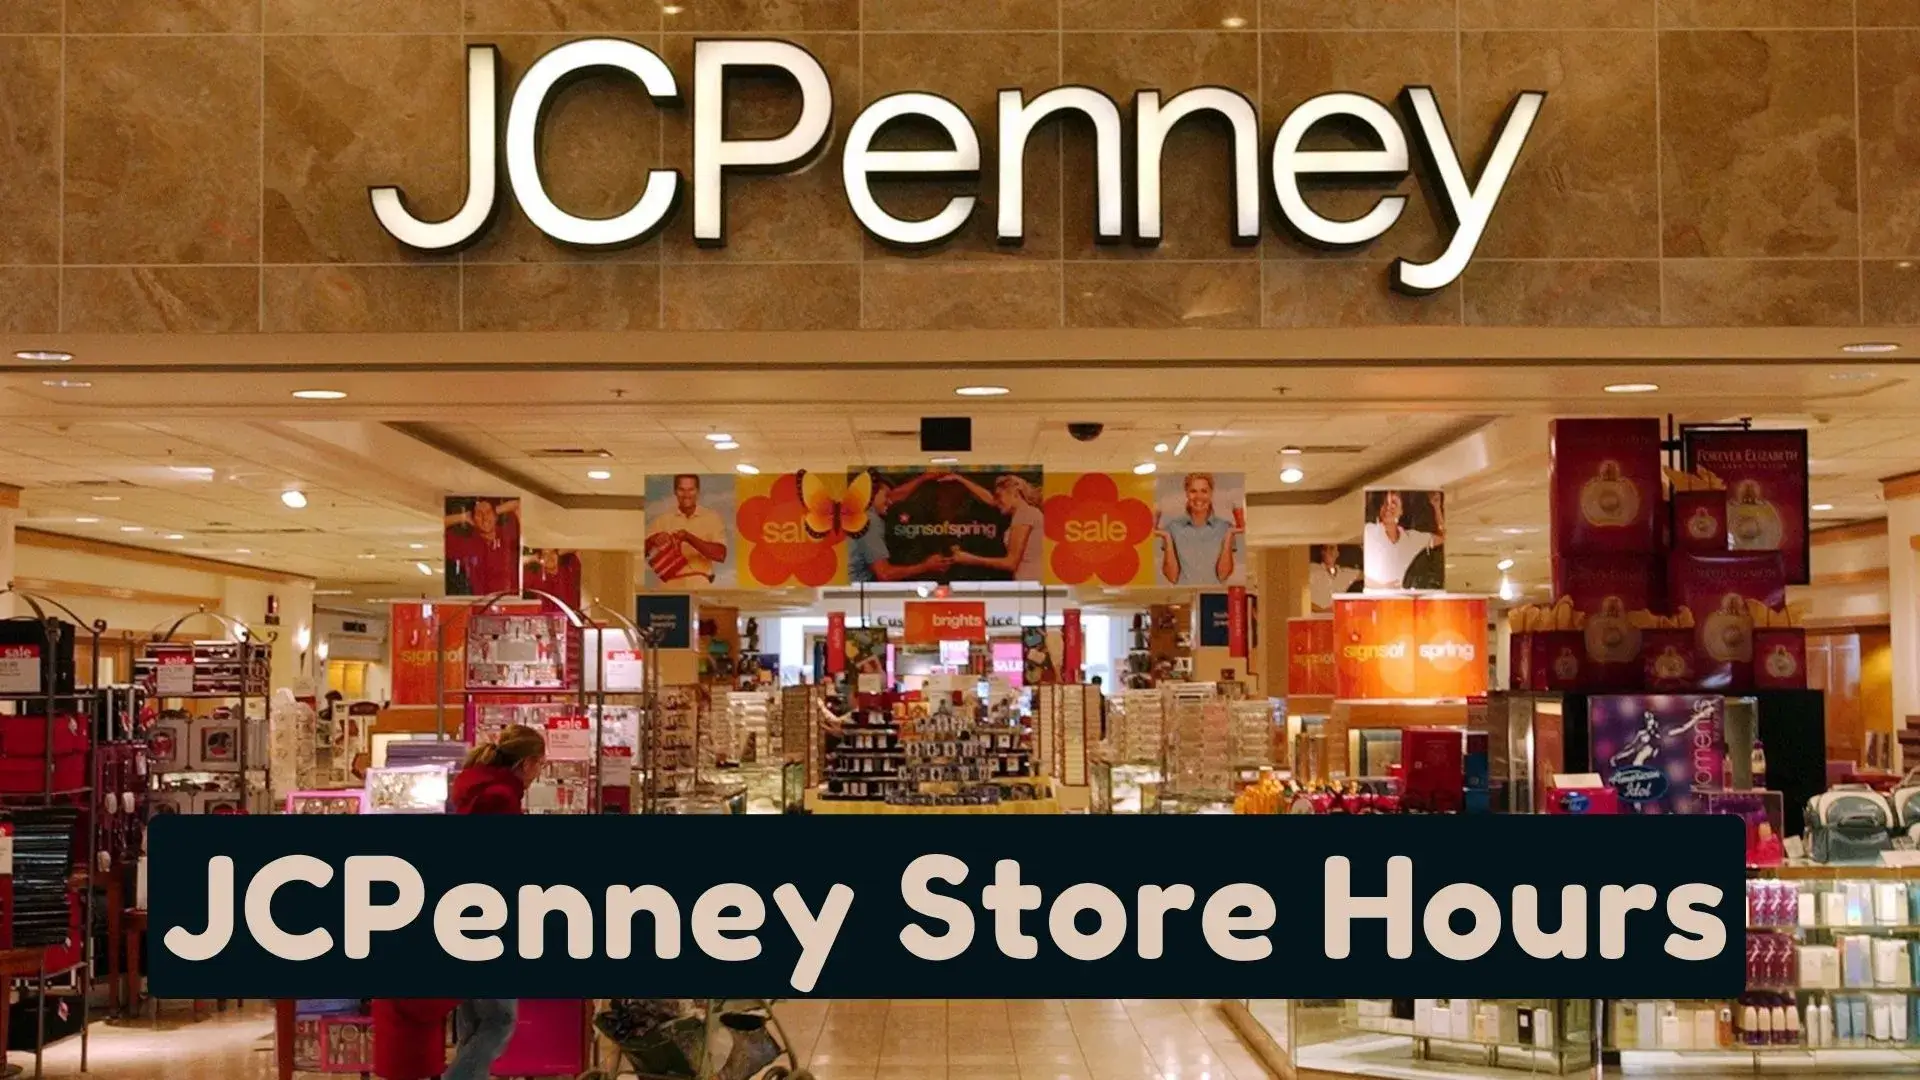 JCPenney Hours Are Changing in 2023! Find the Latest Hours for Your Local Store and Never Miss a Sale Again.